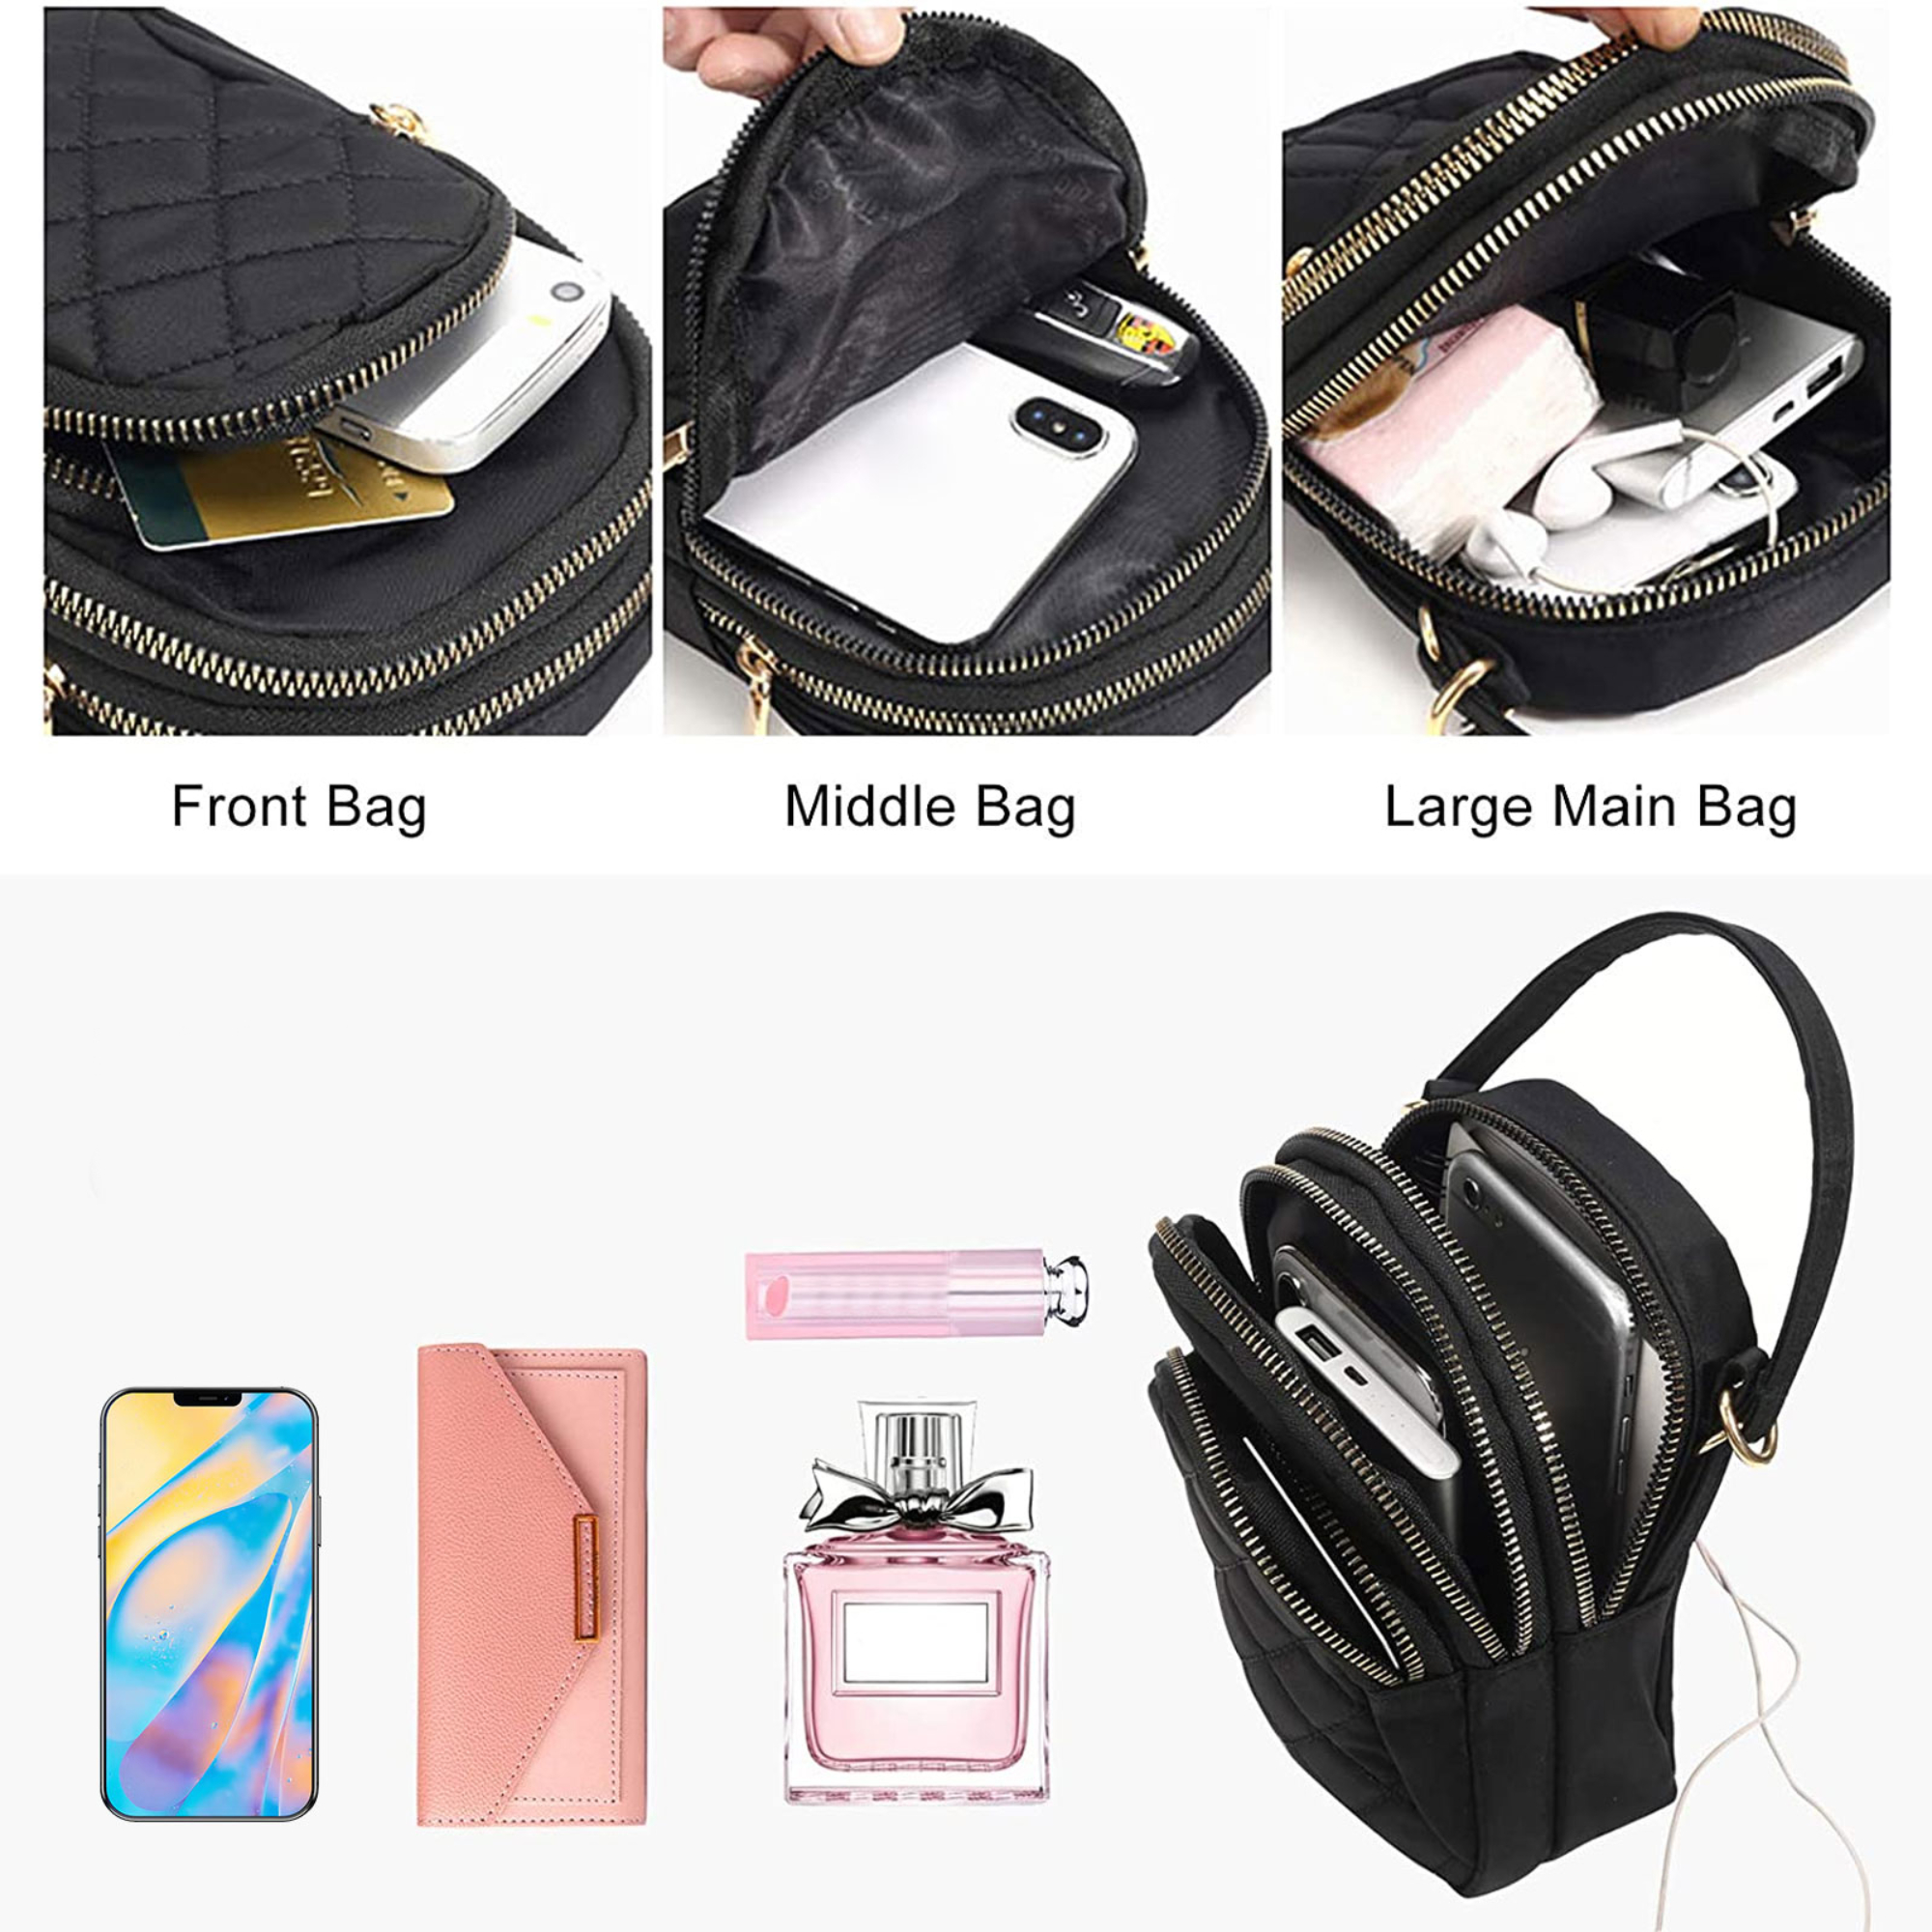 Quilted Cell Phone Purse, TSV Multi-Pockets Crossbody Phone Pouch Bag with Adjustable Strap and Headphone Hole for Women - image 4 of 6